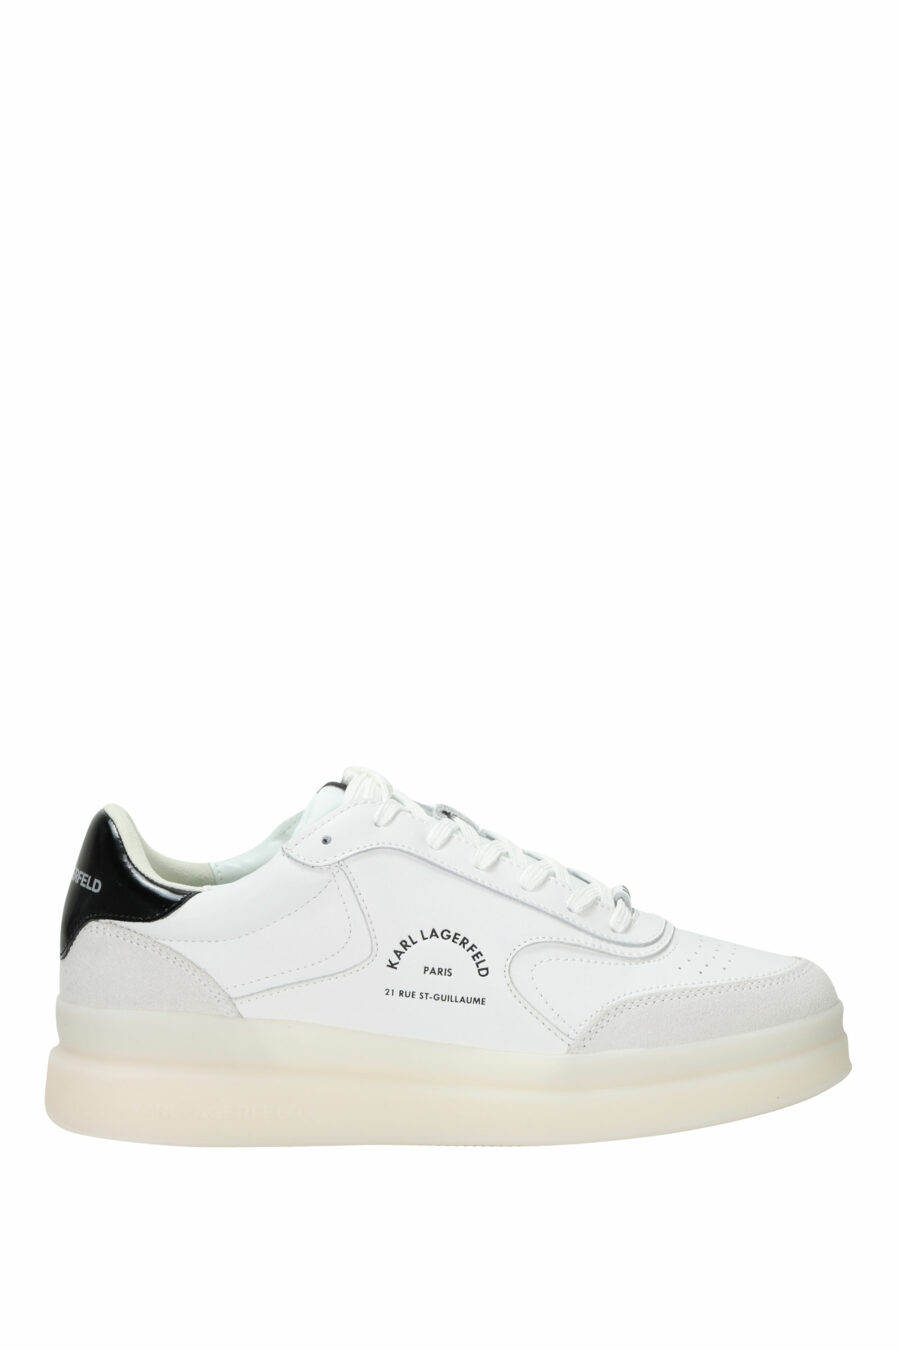 White trainers mix "brink" with mini-logo "rue st guillaume" - 5059529396984